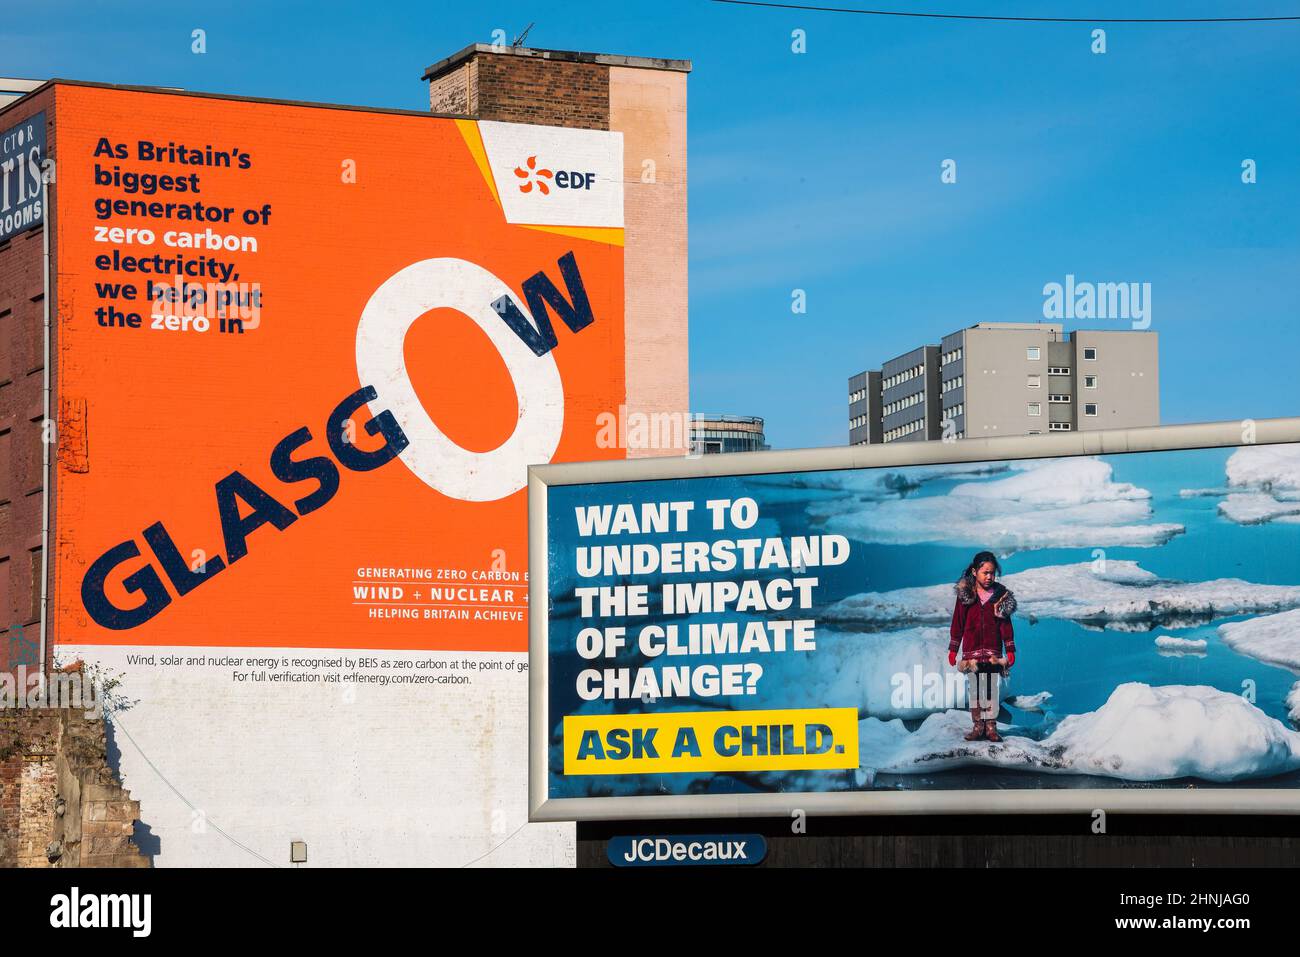 Advertising Billboards on display during COP26 conference in Glasgow Scotland in 2021 Stock Photo